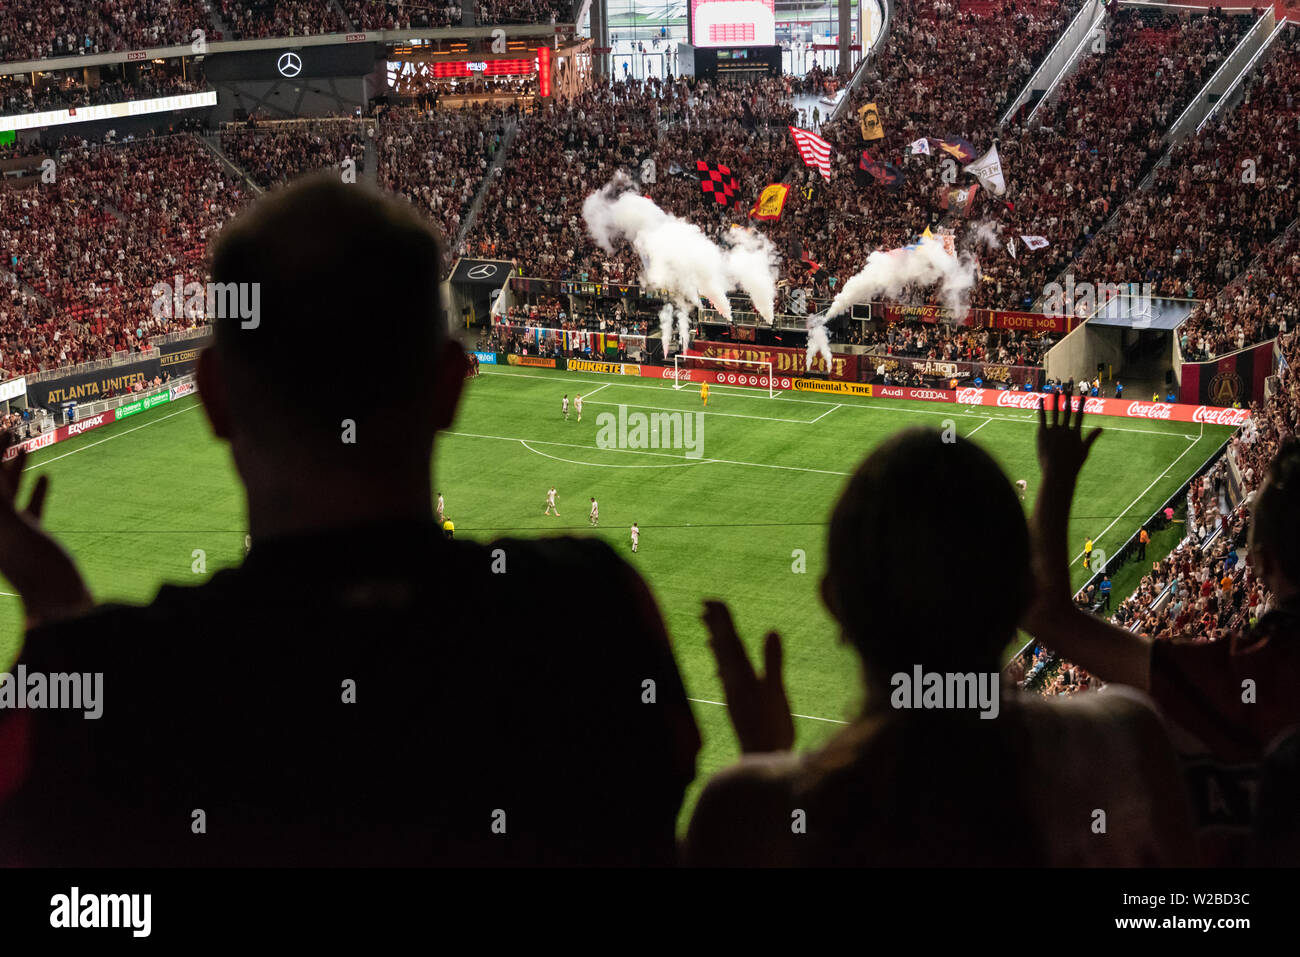 Soccer fans celebrating after a goal is scored by Atlanta United FC on their home field at Mecedes-Benz Stadium in Atlanta, Georgia. (USA) Stock Photo